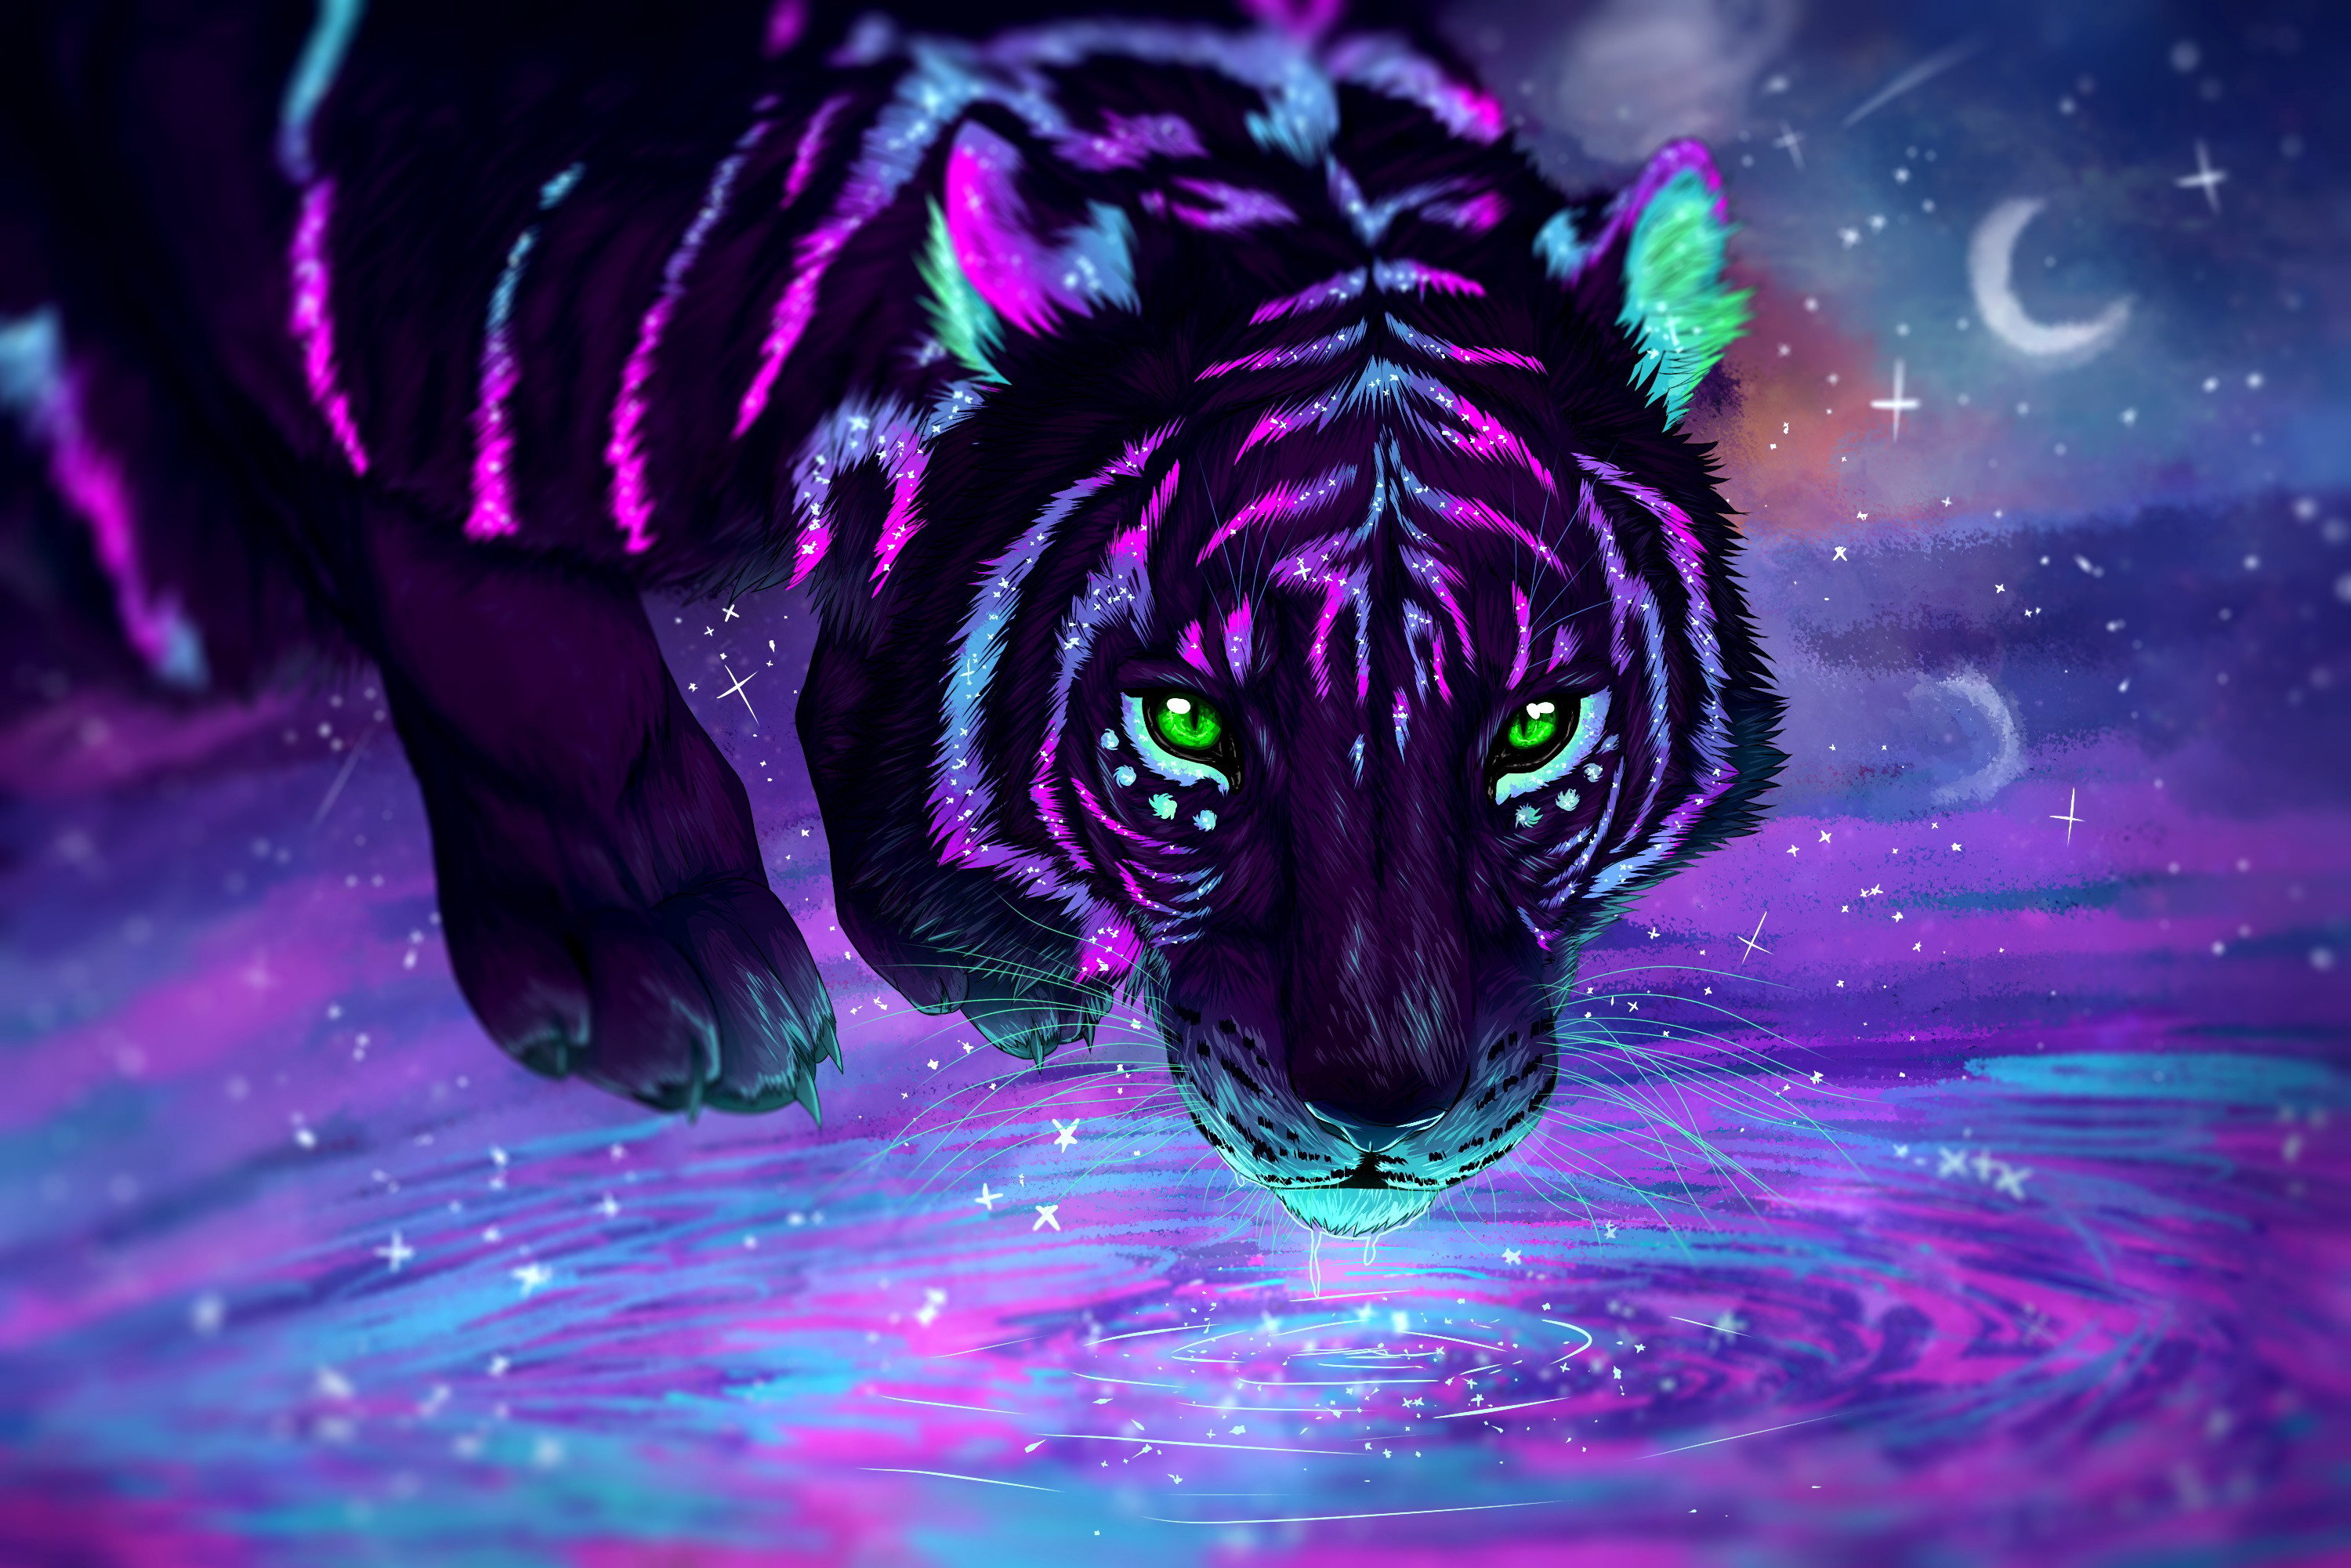 Tiger With Wings Wallpapers